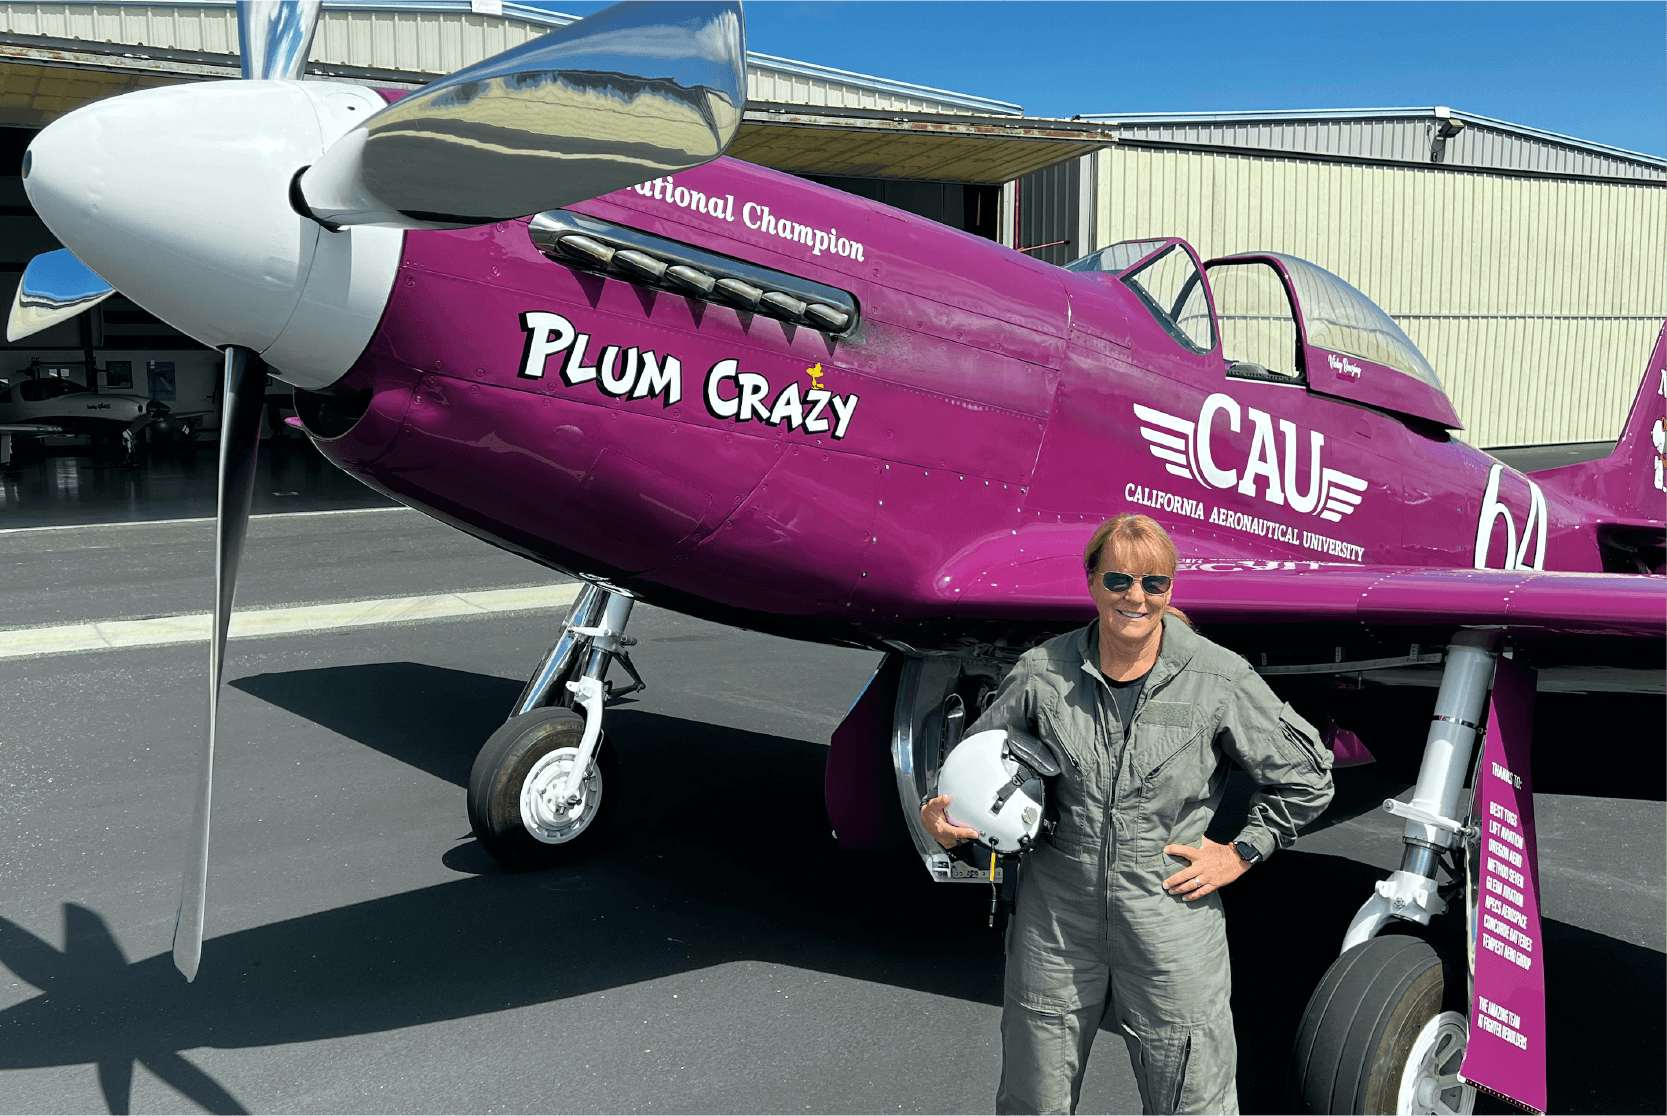 Vicky and Plum Crazy P51 Mustang